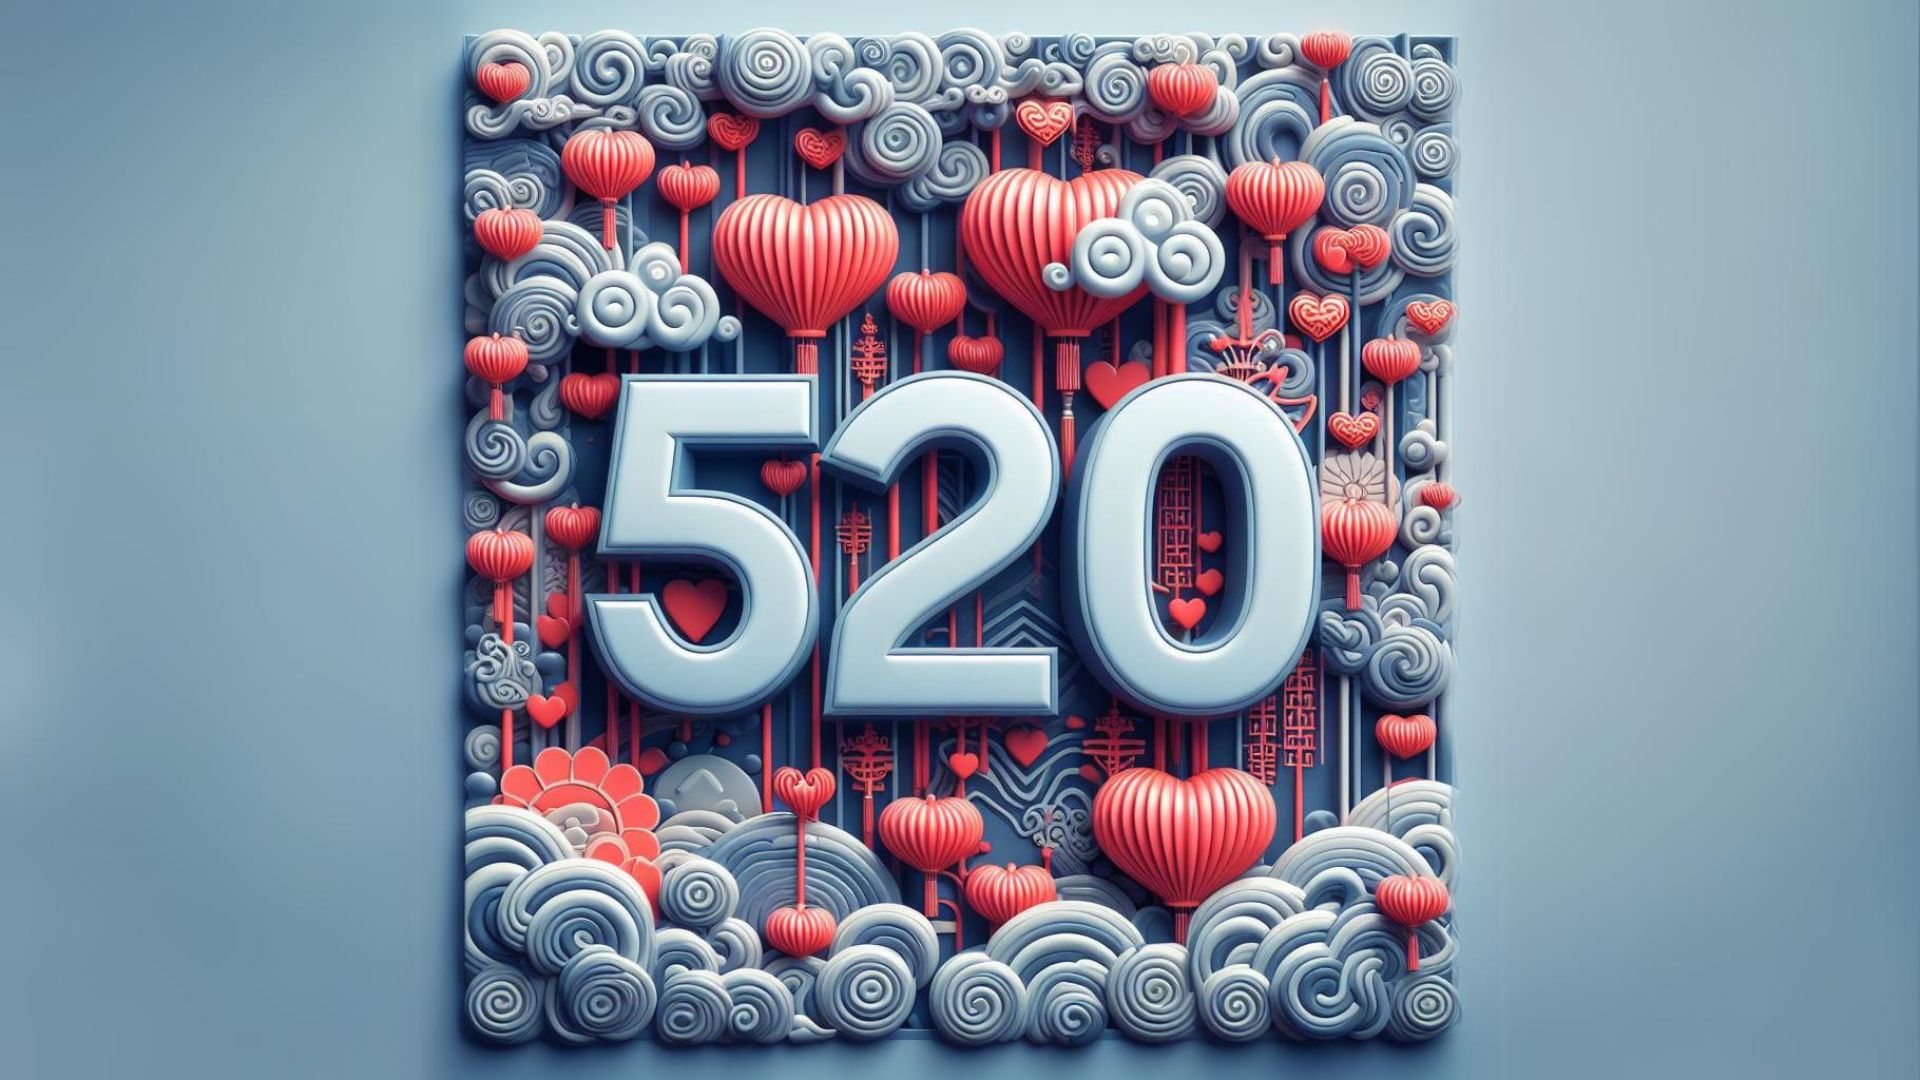 520: The Chinese love word and number you need to know